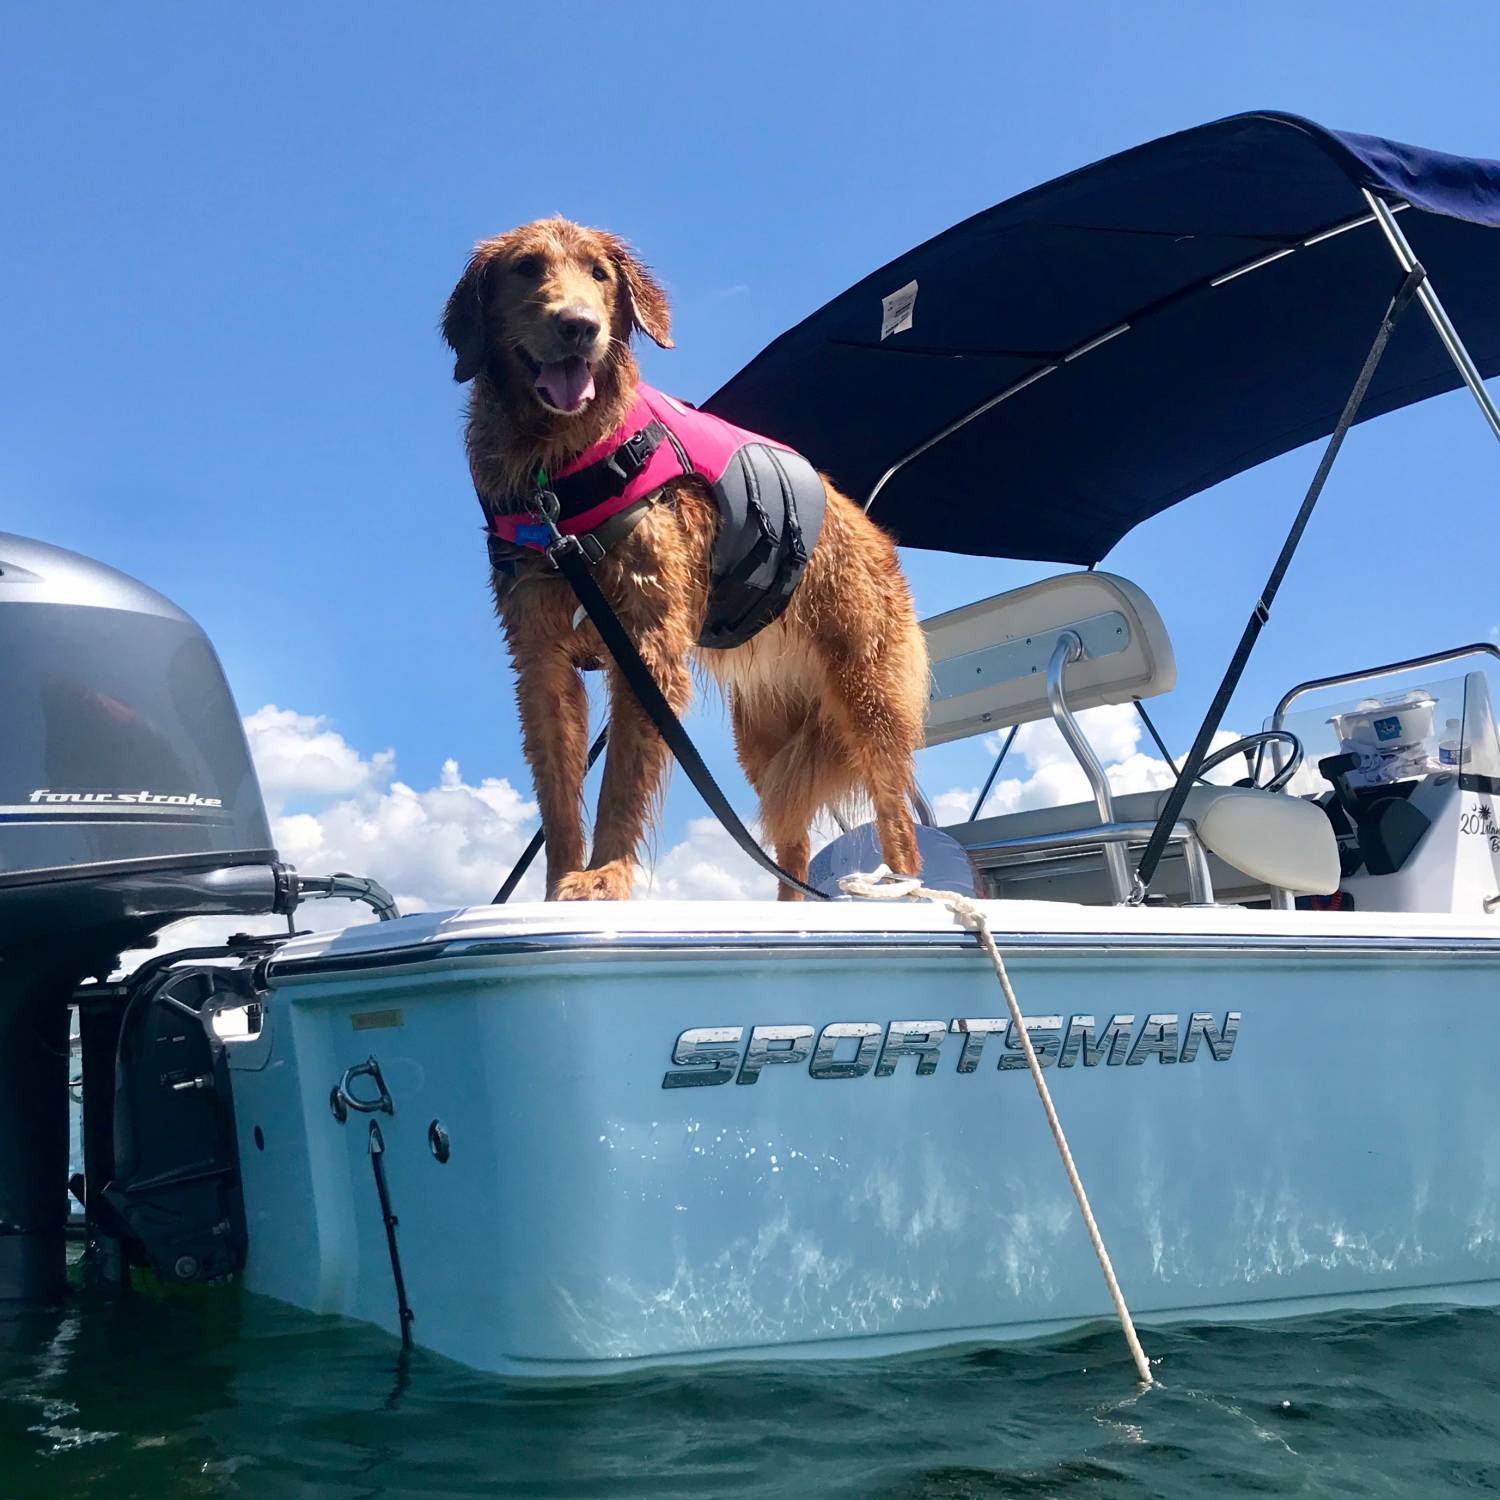 This is my 12 year old Golden Enjoying the boat. She has cancer and we cherish every moment wit...